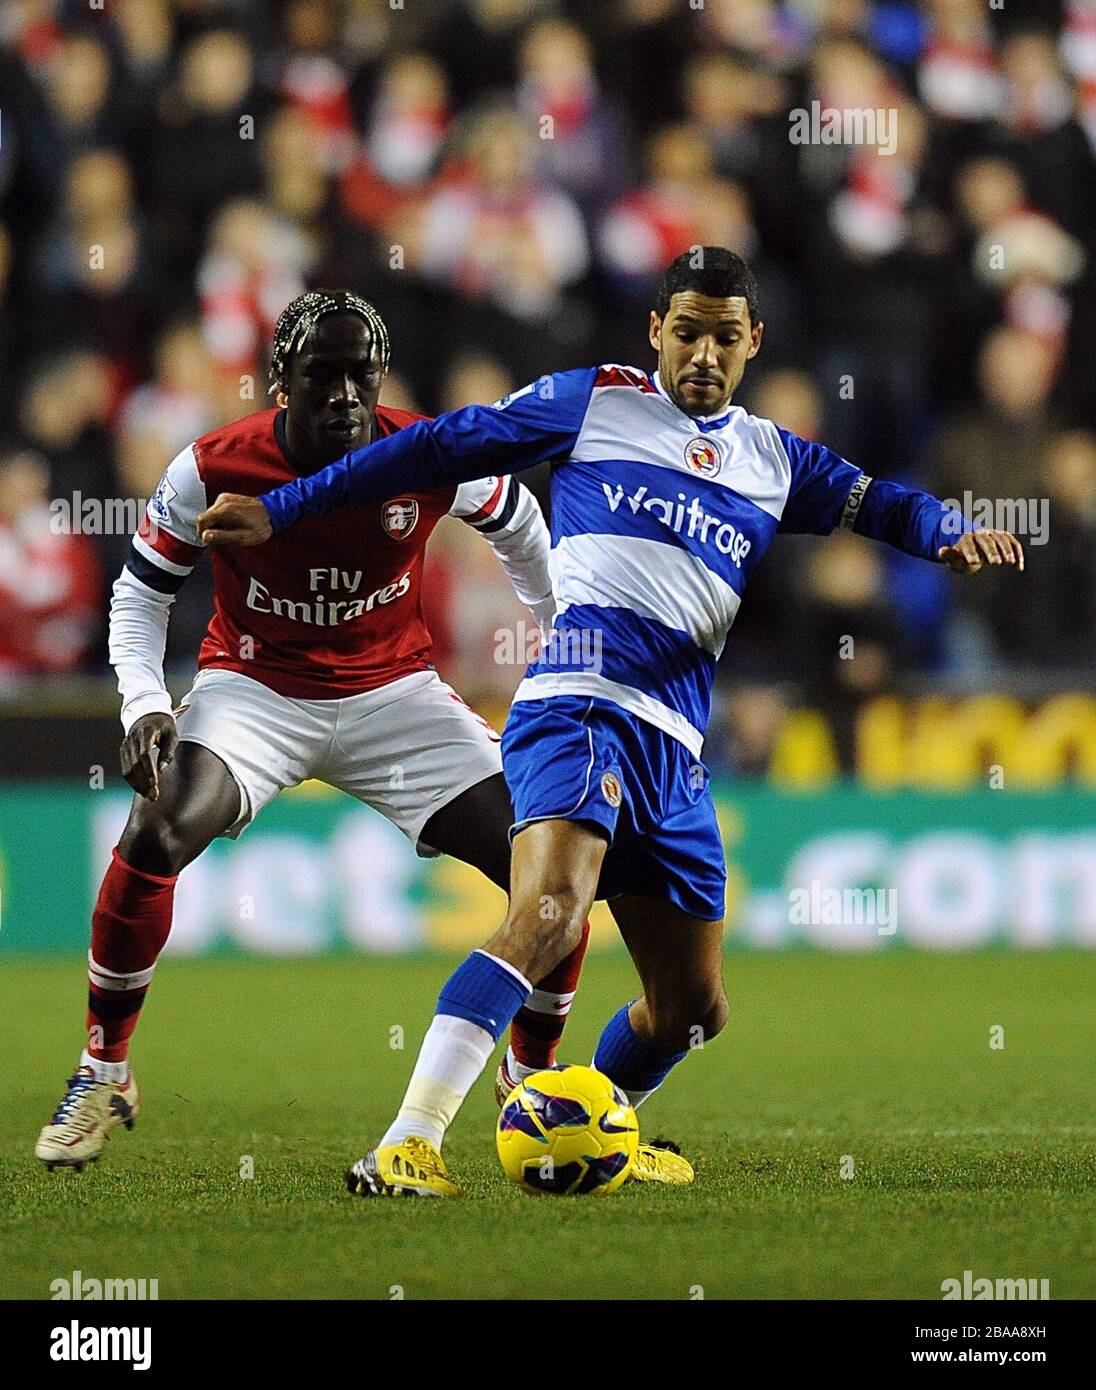 Arsenal's Bacary Sagna (left) and Reading's Jobi McAnuff battle for the ball Stock Photo